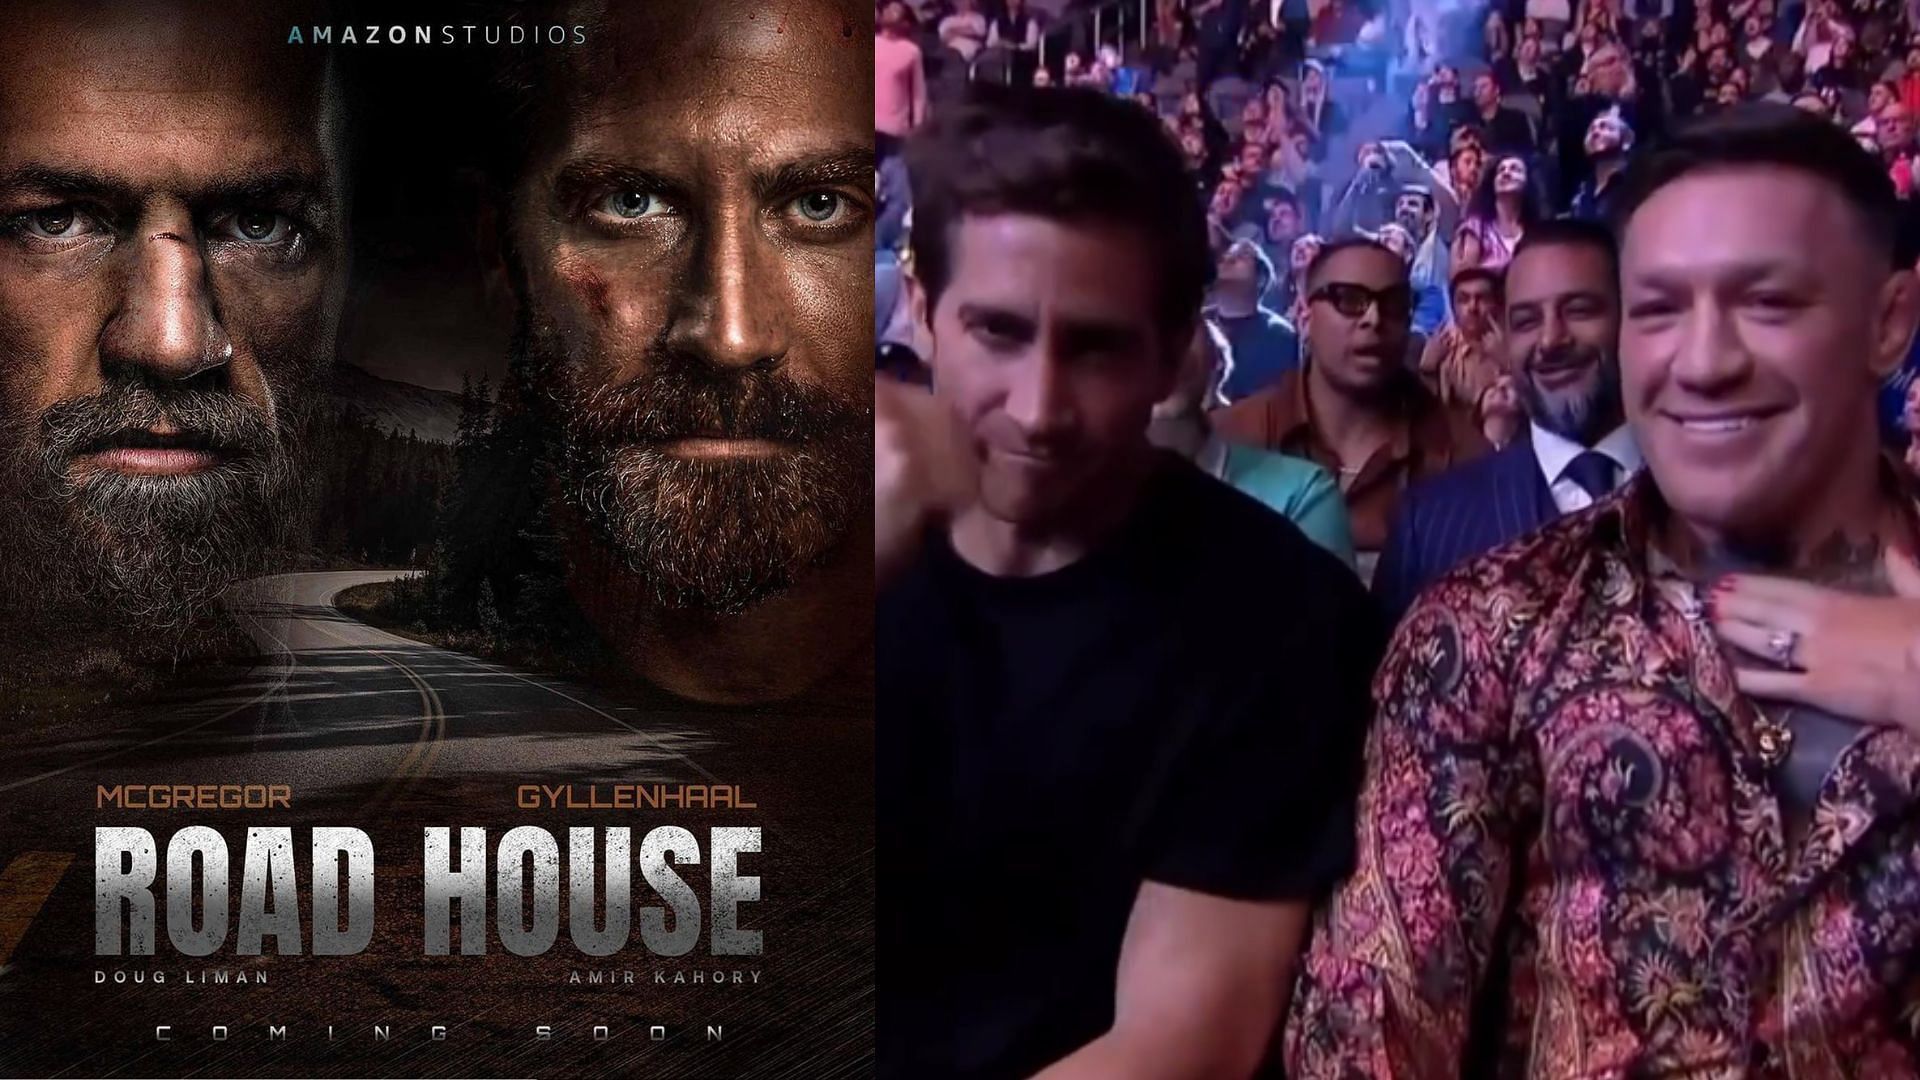 oad house remake release date Conor McGregor reveals likely release